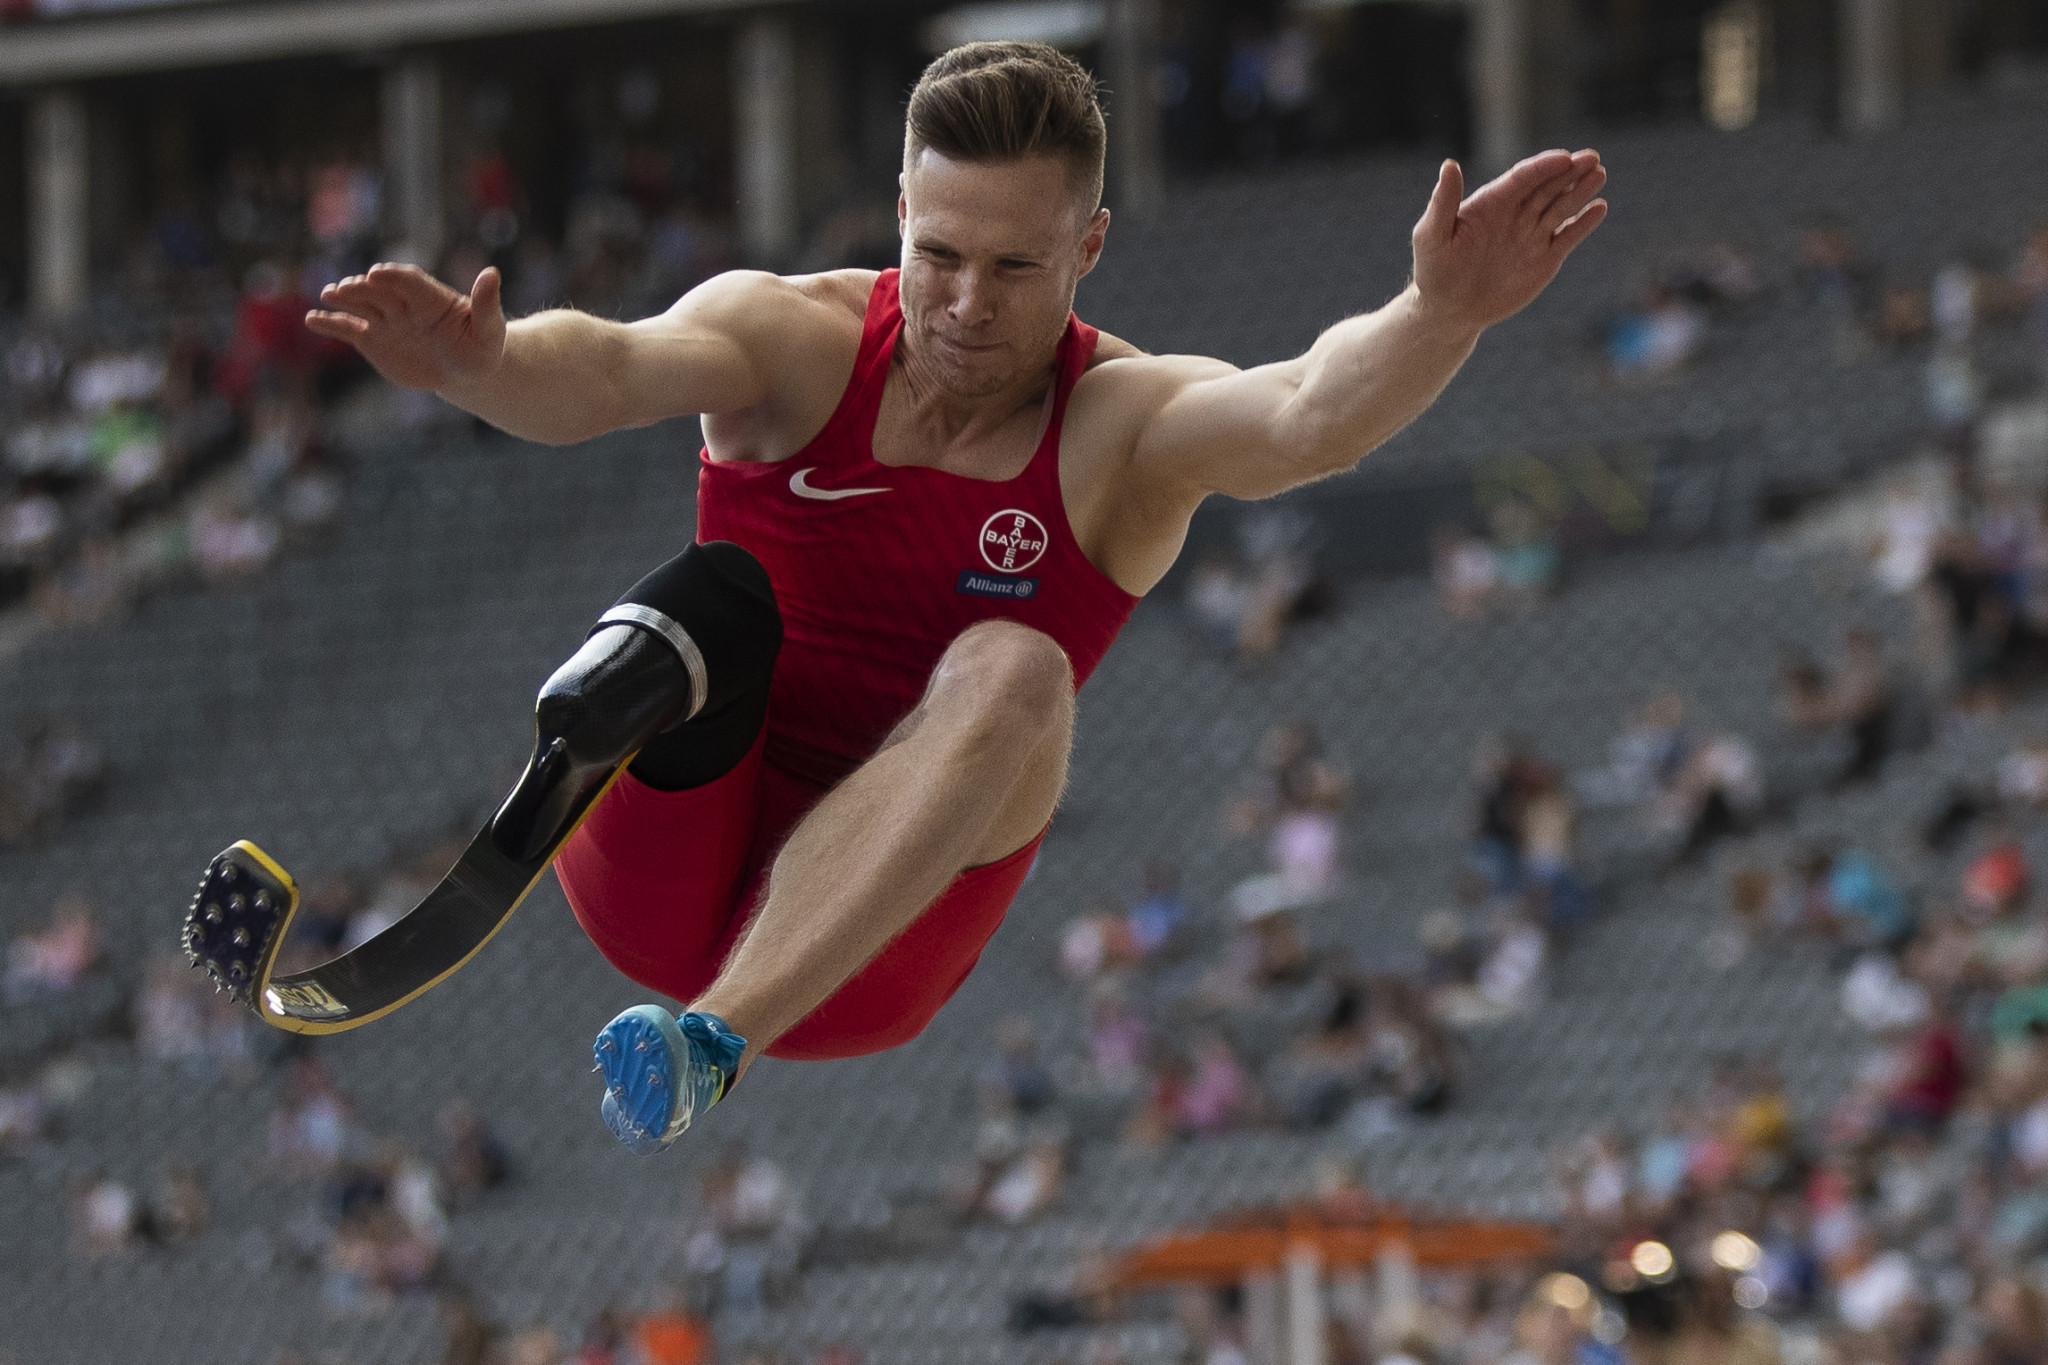 Germany's three-time Paralympic gold medal winning long jumper Markus Rehm  will aim to break his current T64 world record jump of 8.48 metres at a special event in Tokyo to mark one year until the start of the Paralympis ©Getty Images